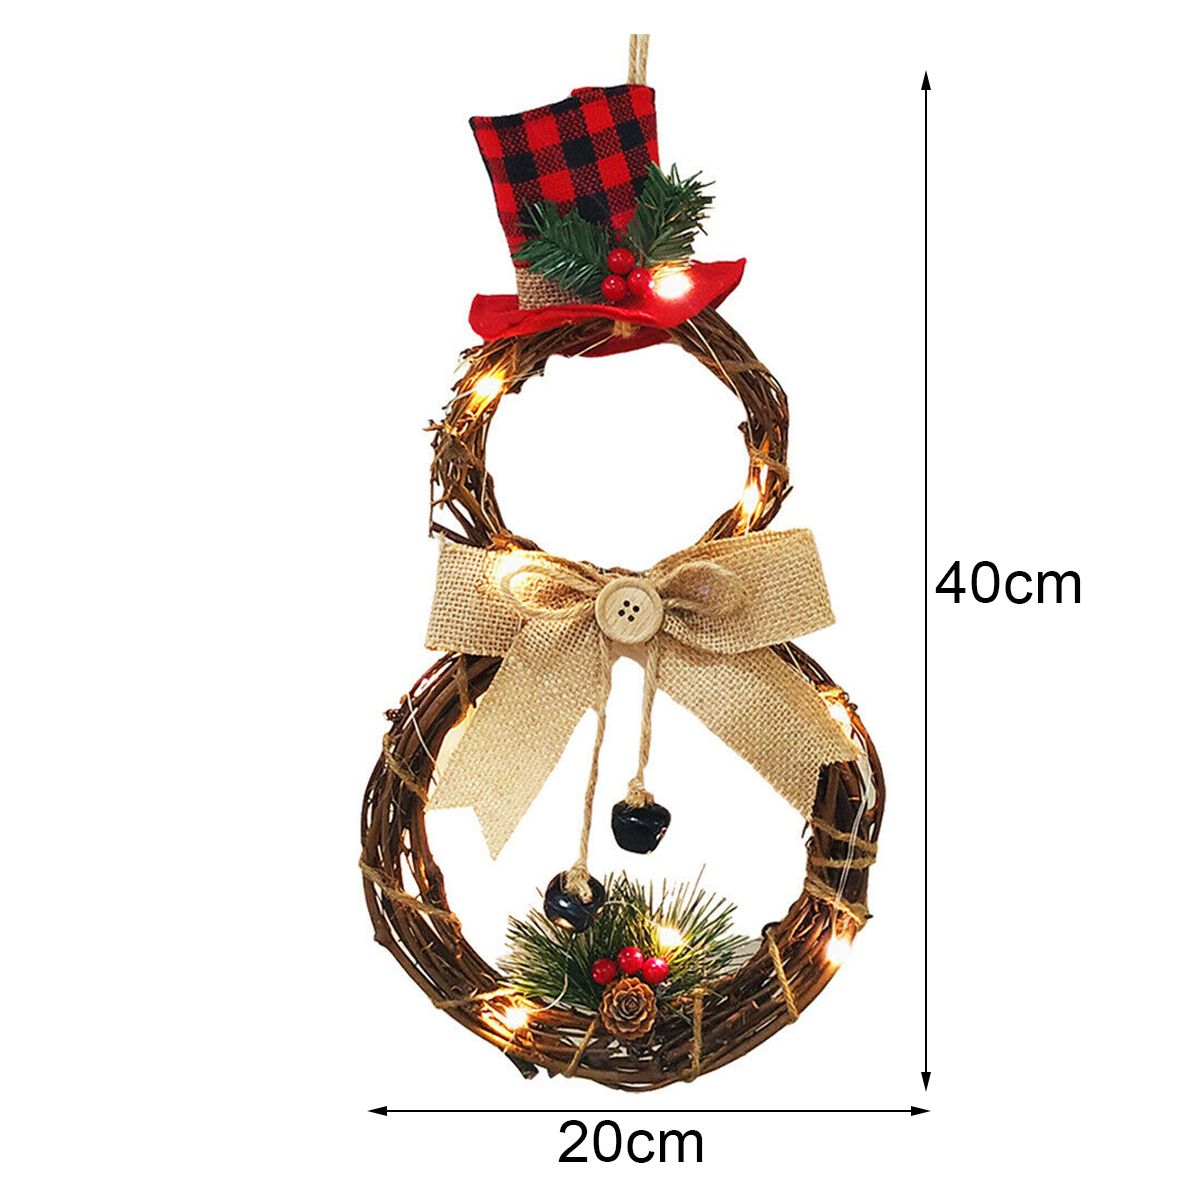 Christmas-LED-Wreath-Garland-Ornament-Hanging-Xmas-Party-Door-Wall-Home-Decorations-1618824